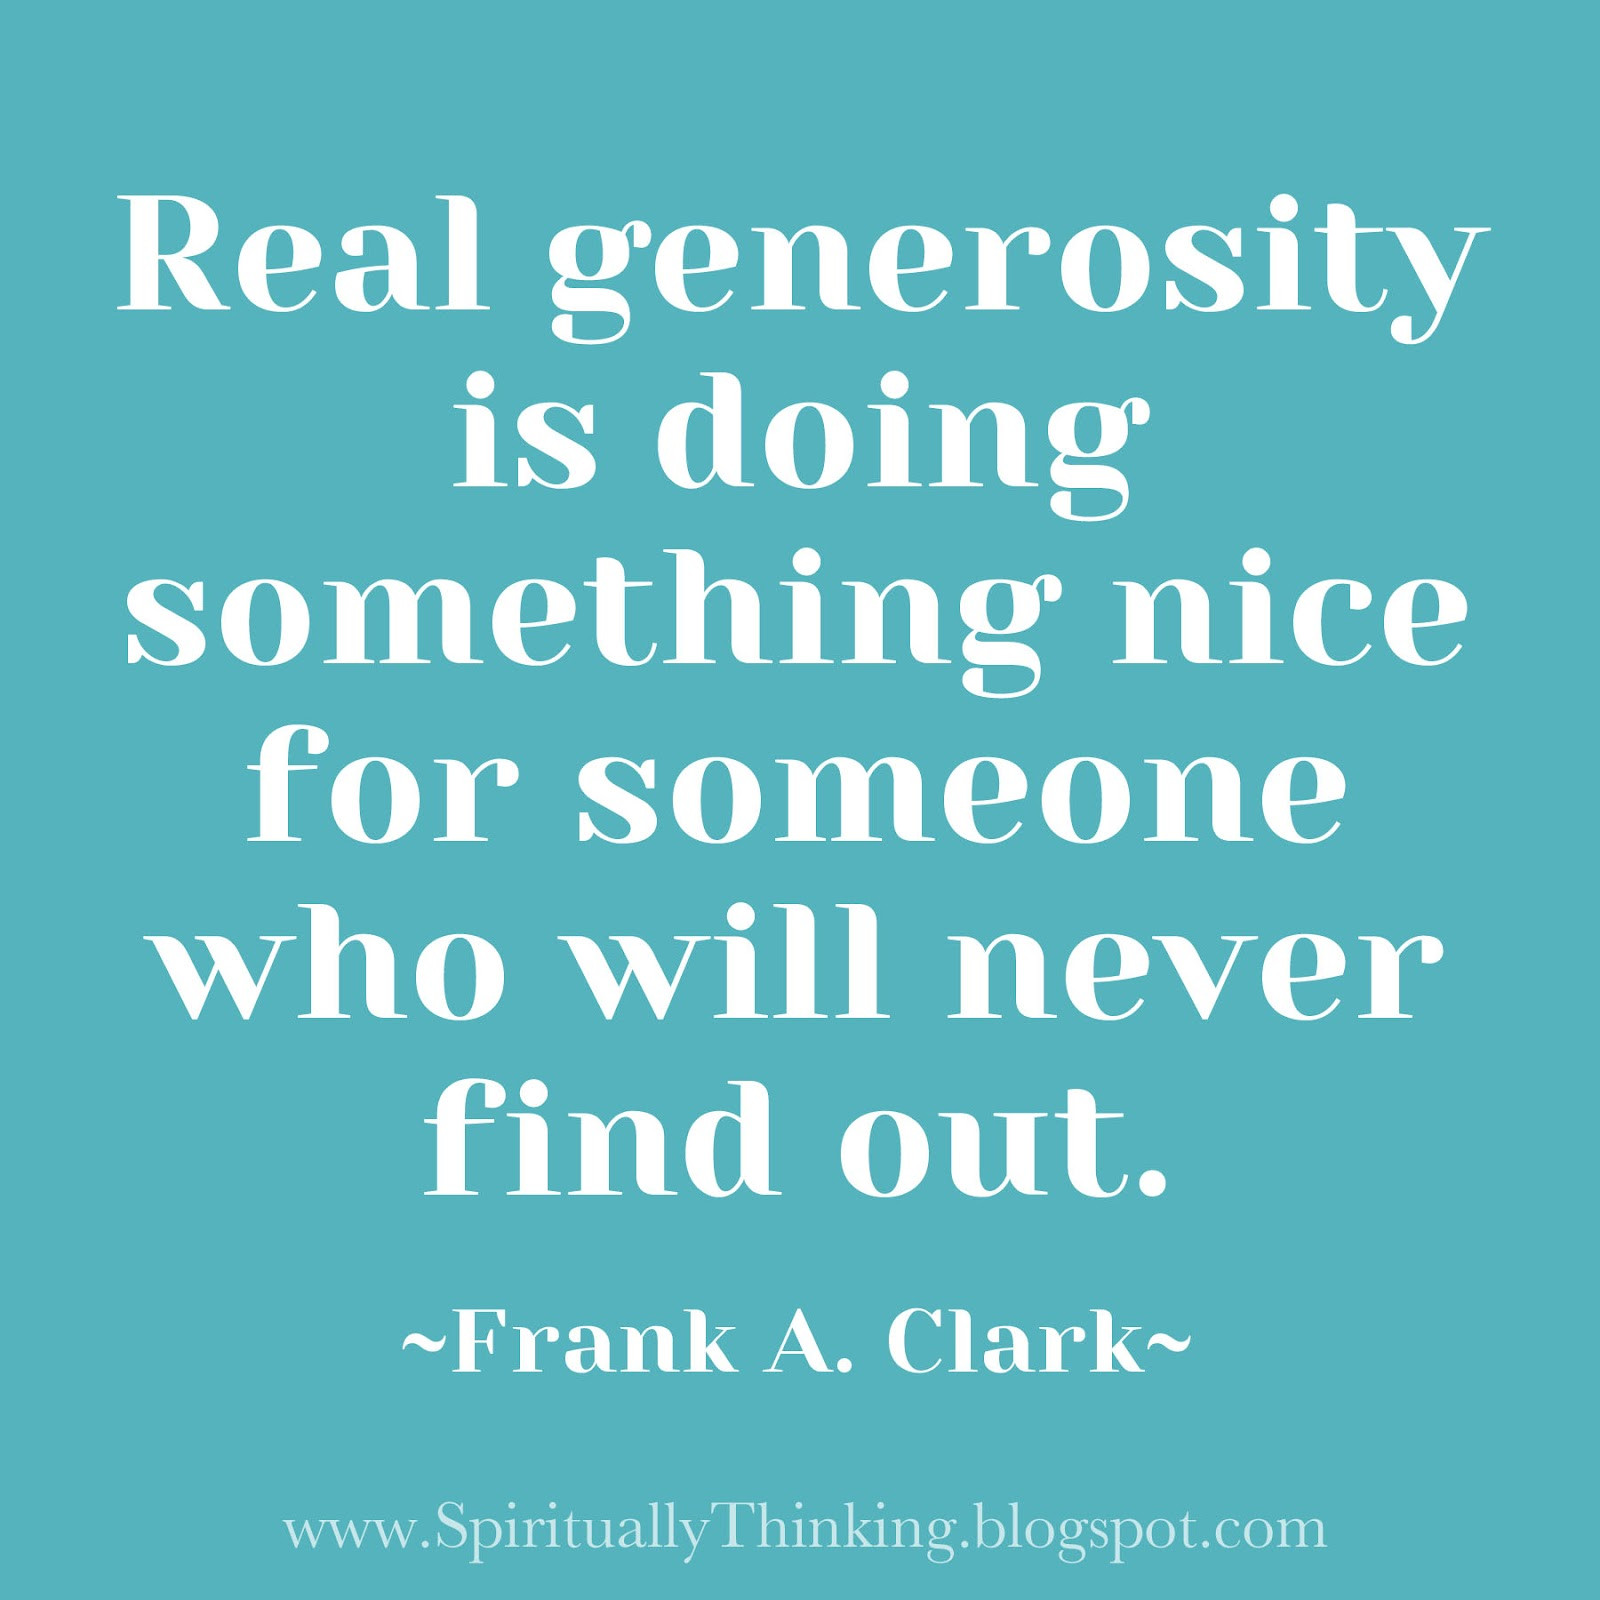 Quotes On Kindness And Generosity
 and Spiritually Speaking Real Generosity